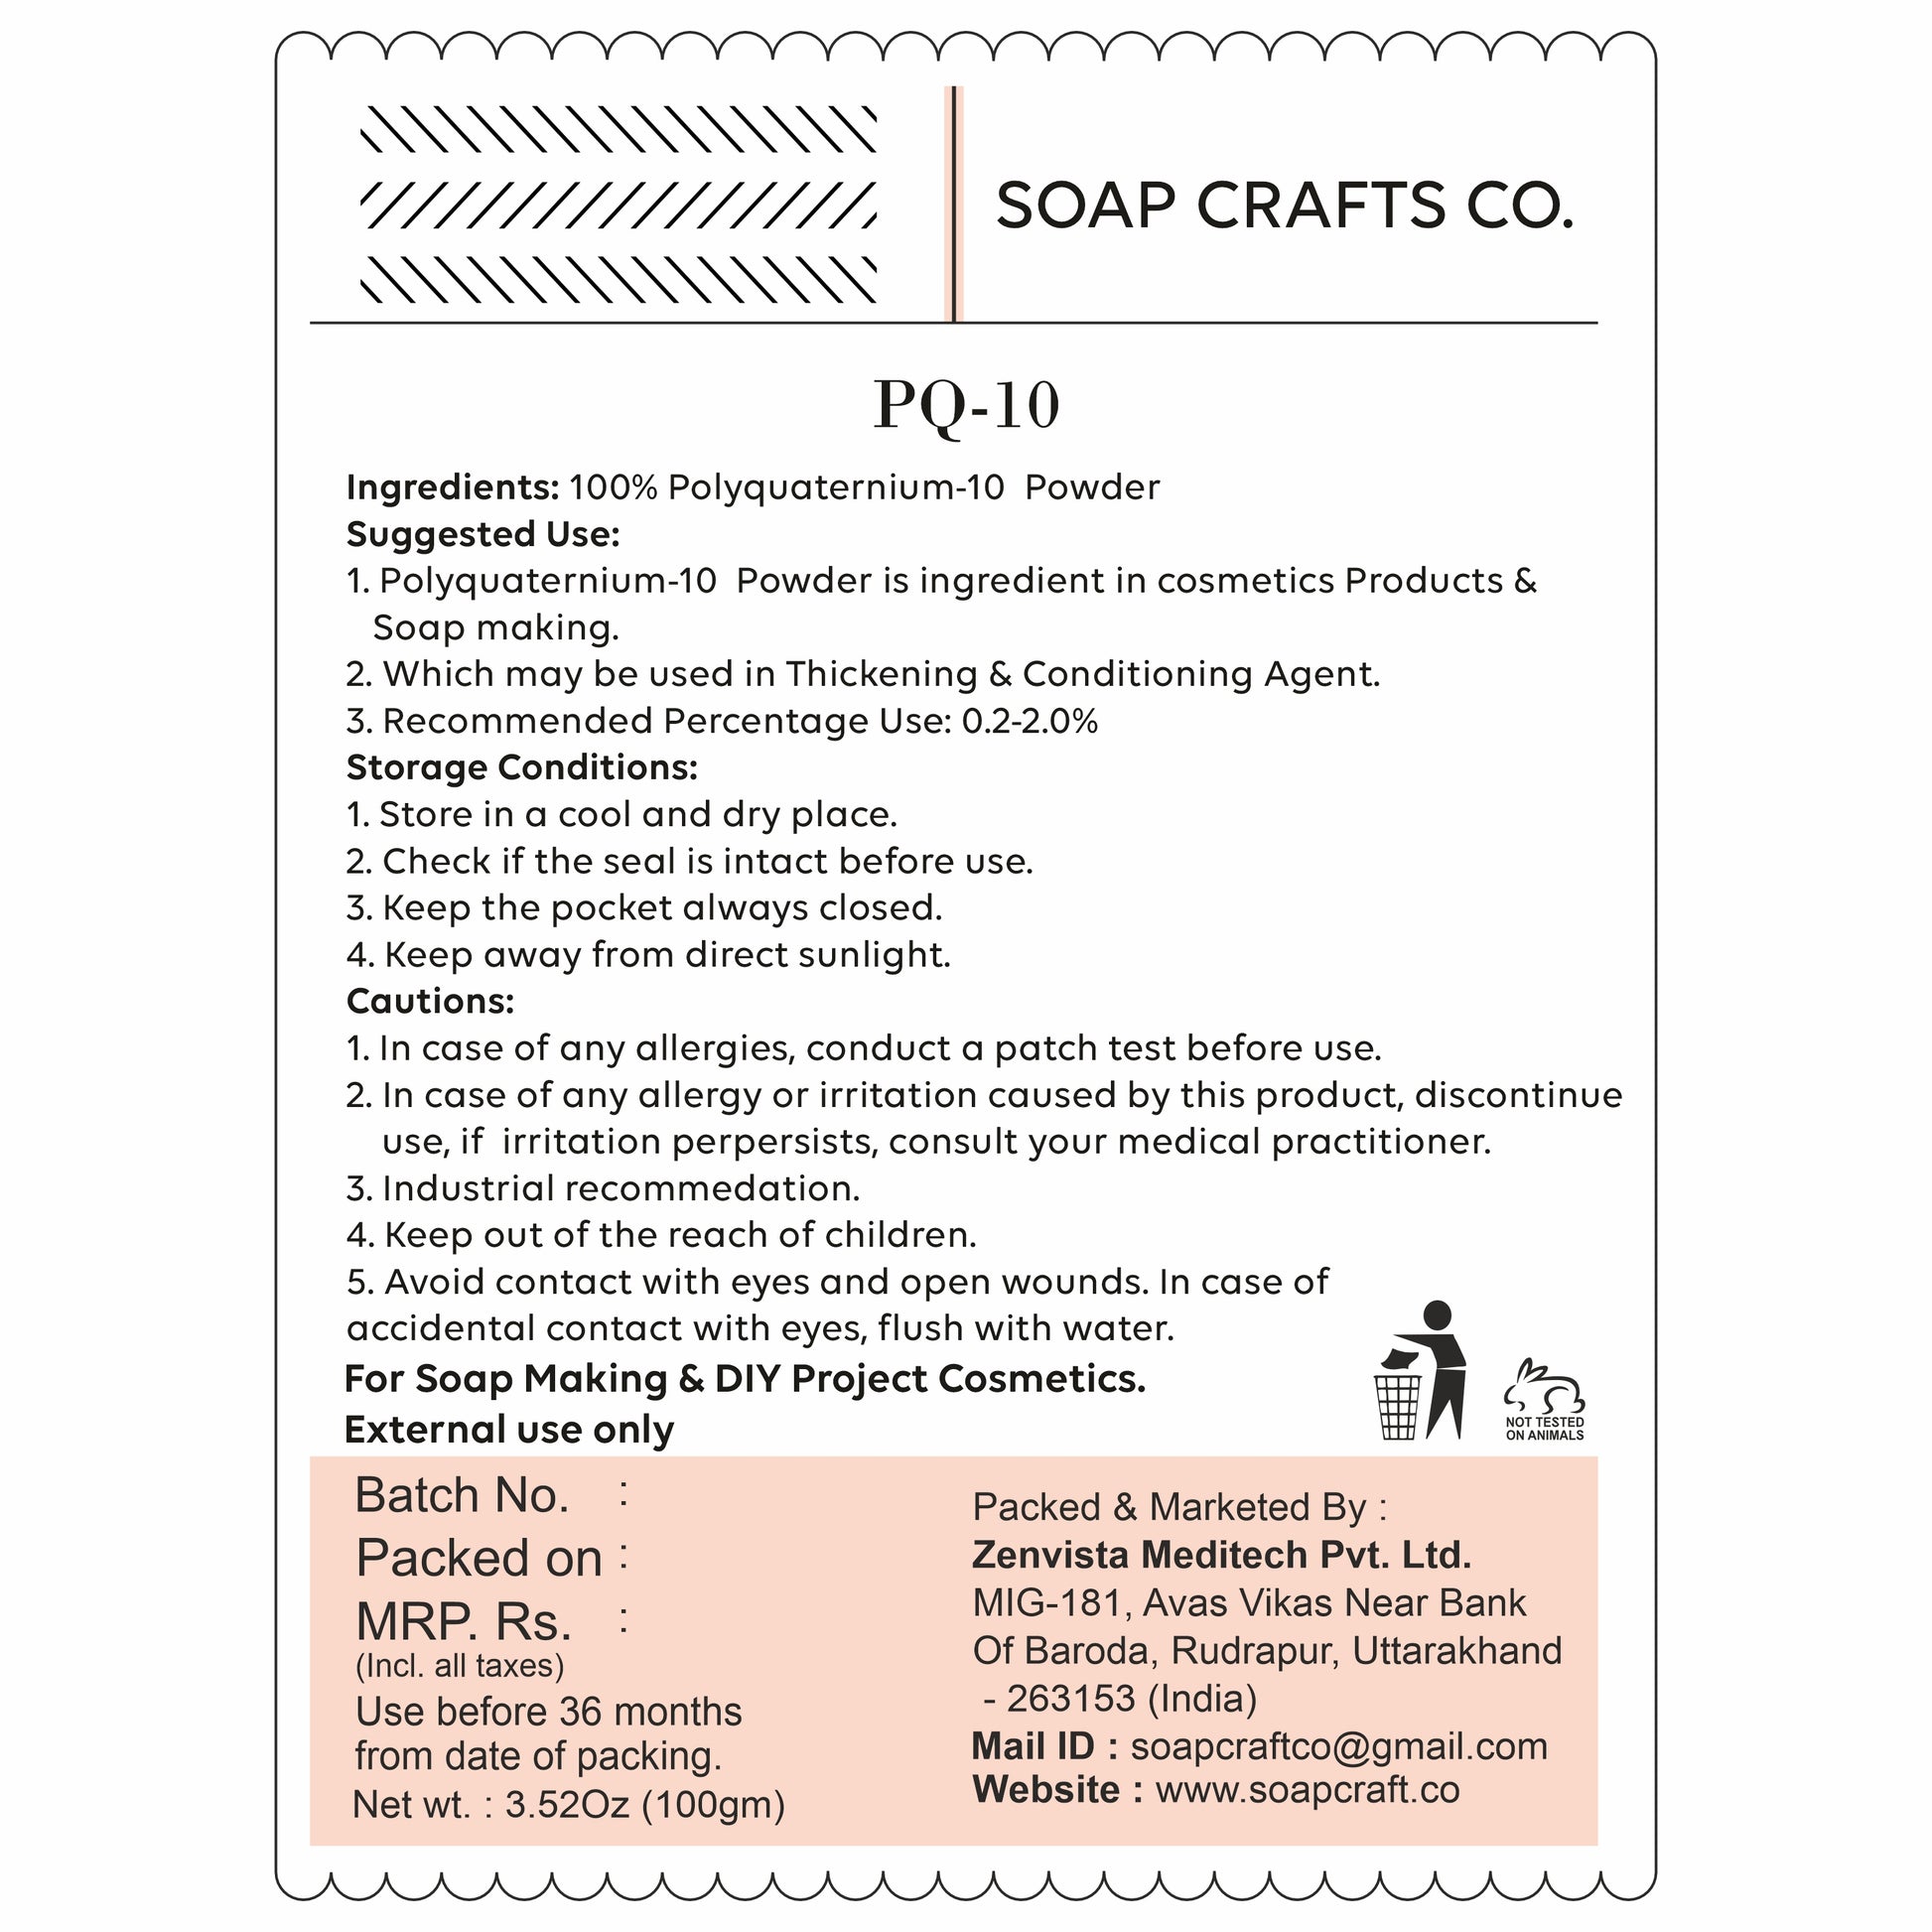 cosmeticmaking, saopmaking, cosmeticmakingingredients, soapmakingingredients,cosmeticingredients,naturalingredients,organicingredients,veganingredients, essentialoils,fragranceoils,carrieroils, carrieroils, butters, clays,botanicals,herbs,preservatives,emulsifiers,surfa ctants,thickeners, thickeners,exfoliants